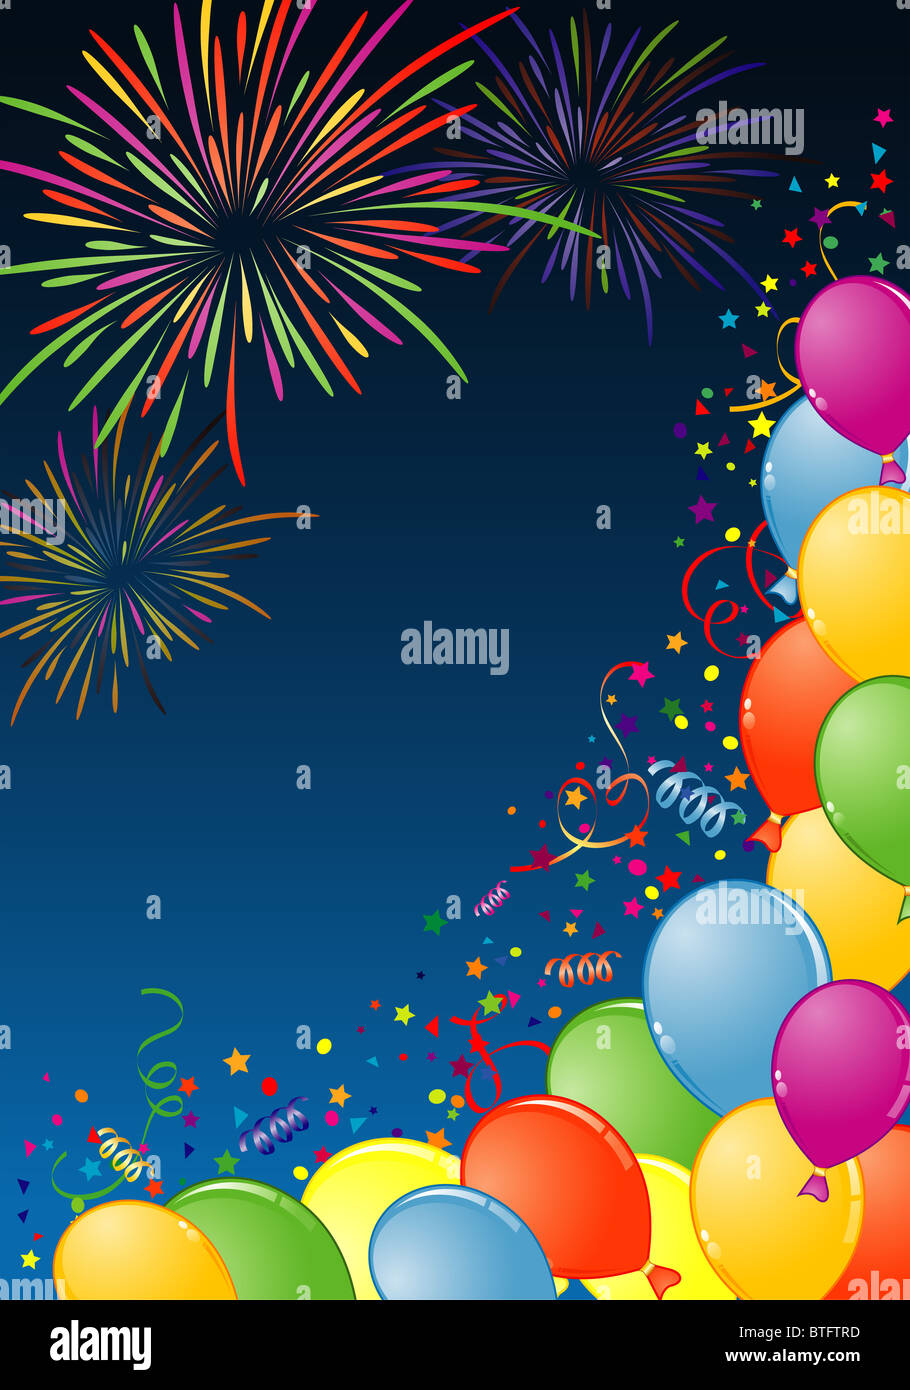 Birthday Frame with Balloon, Fireworks and streamer, element for ...